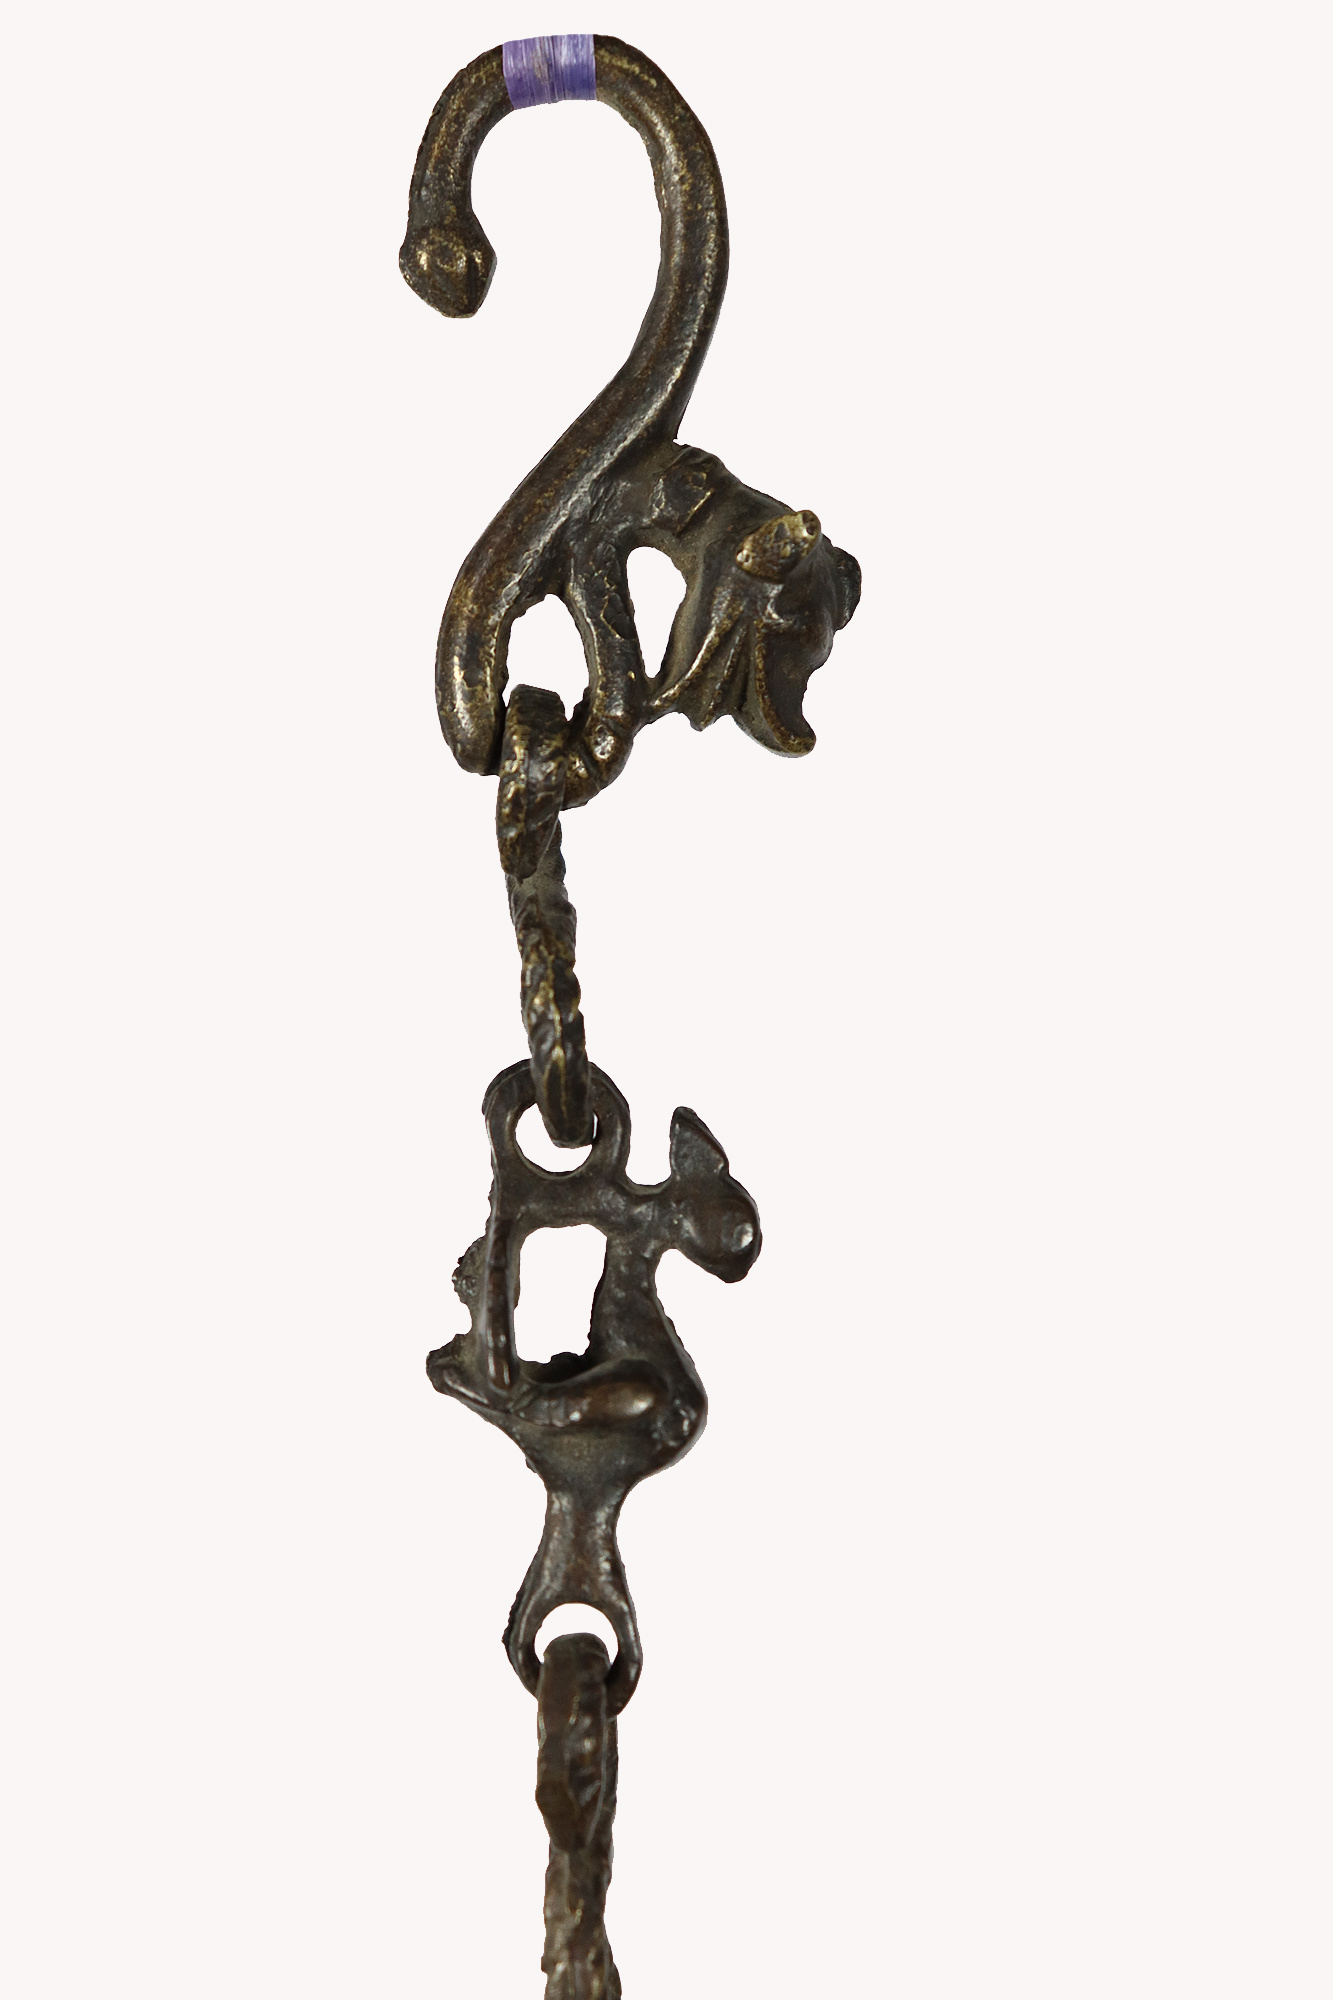 Antique Brass Hanging Bronze Oil Lamp in the Shape of a Bird from india.